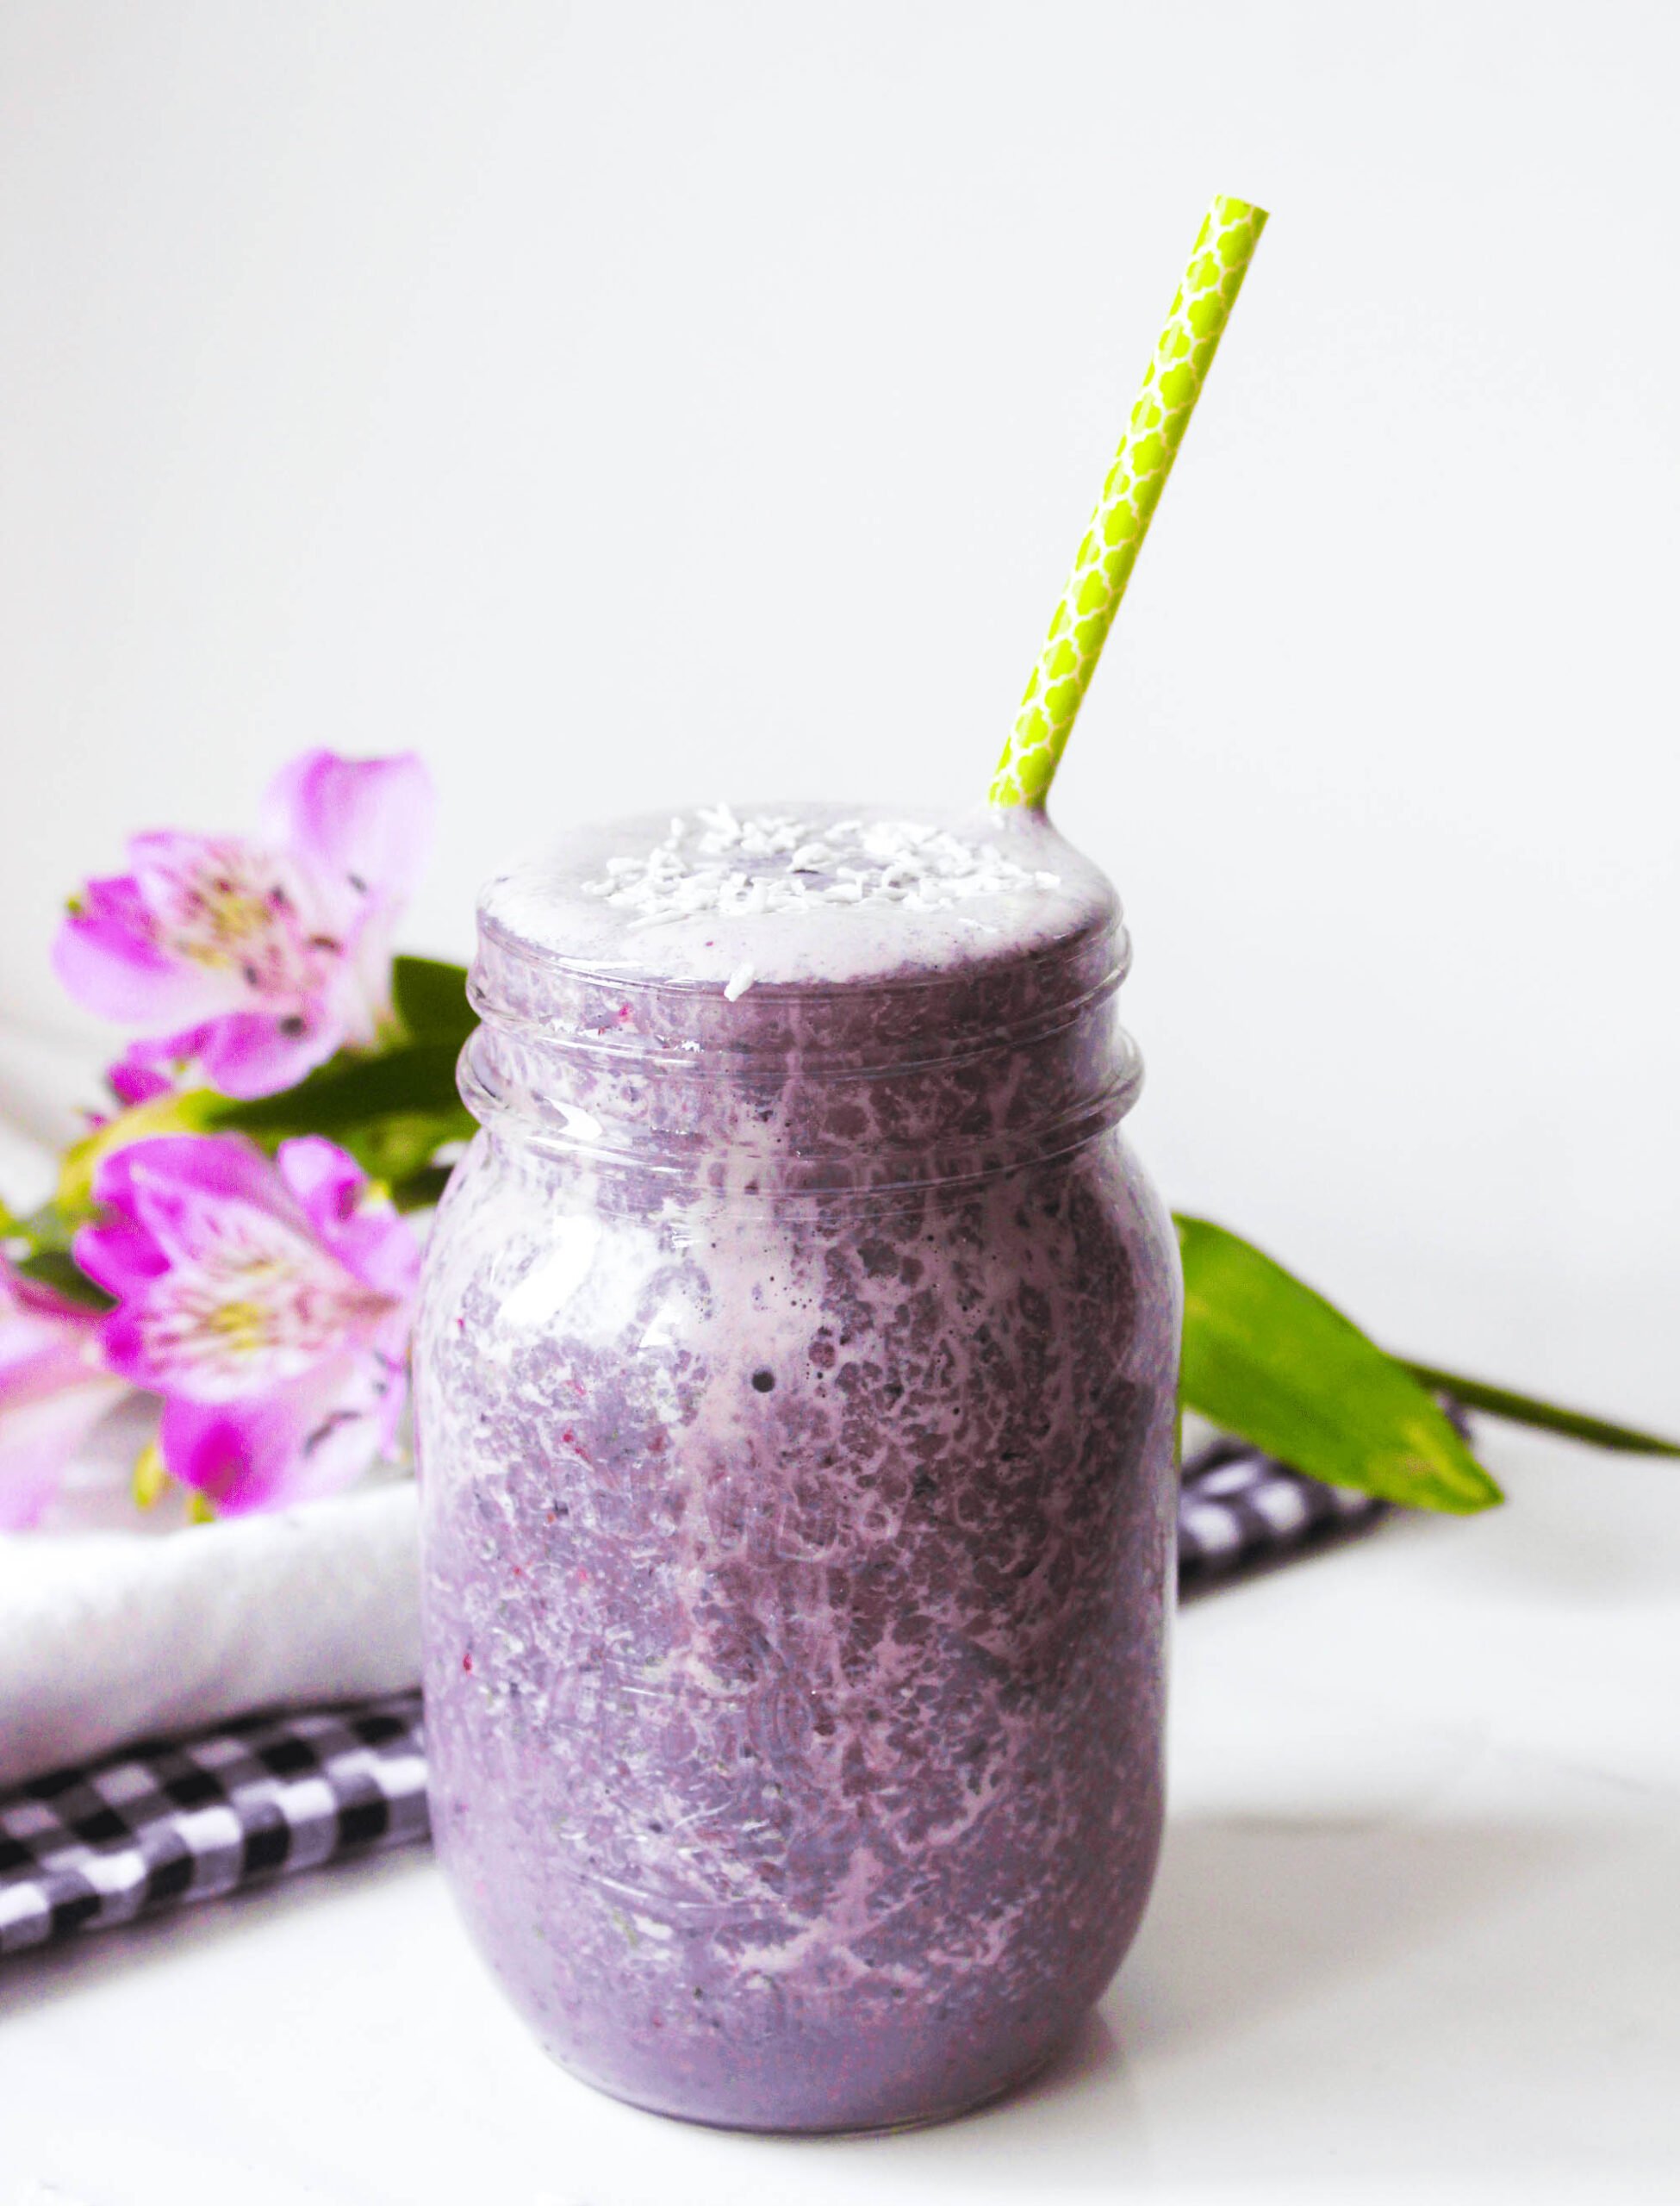 Berry Lemon Smoothie; Light and delicious, vegan and gluten free, packed with healthy raspberries, blueberries, spinach, protein powder, with a hit of citrus lemon.